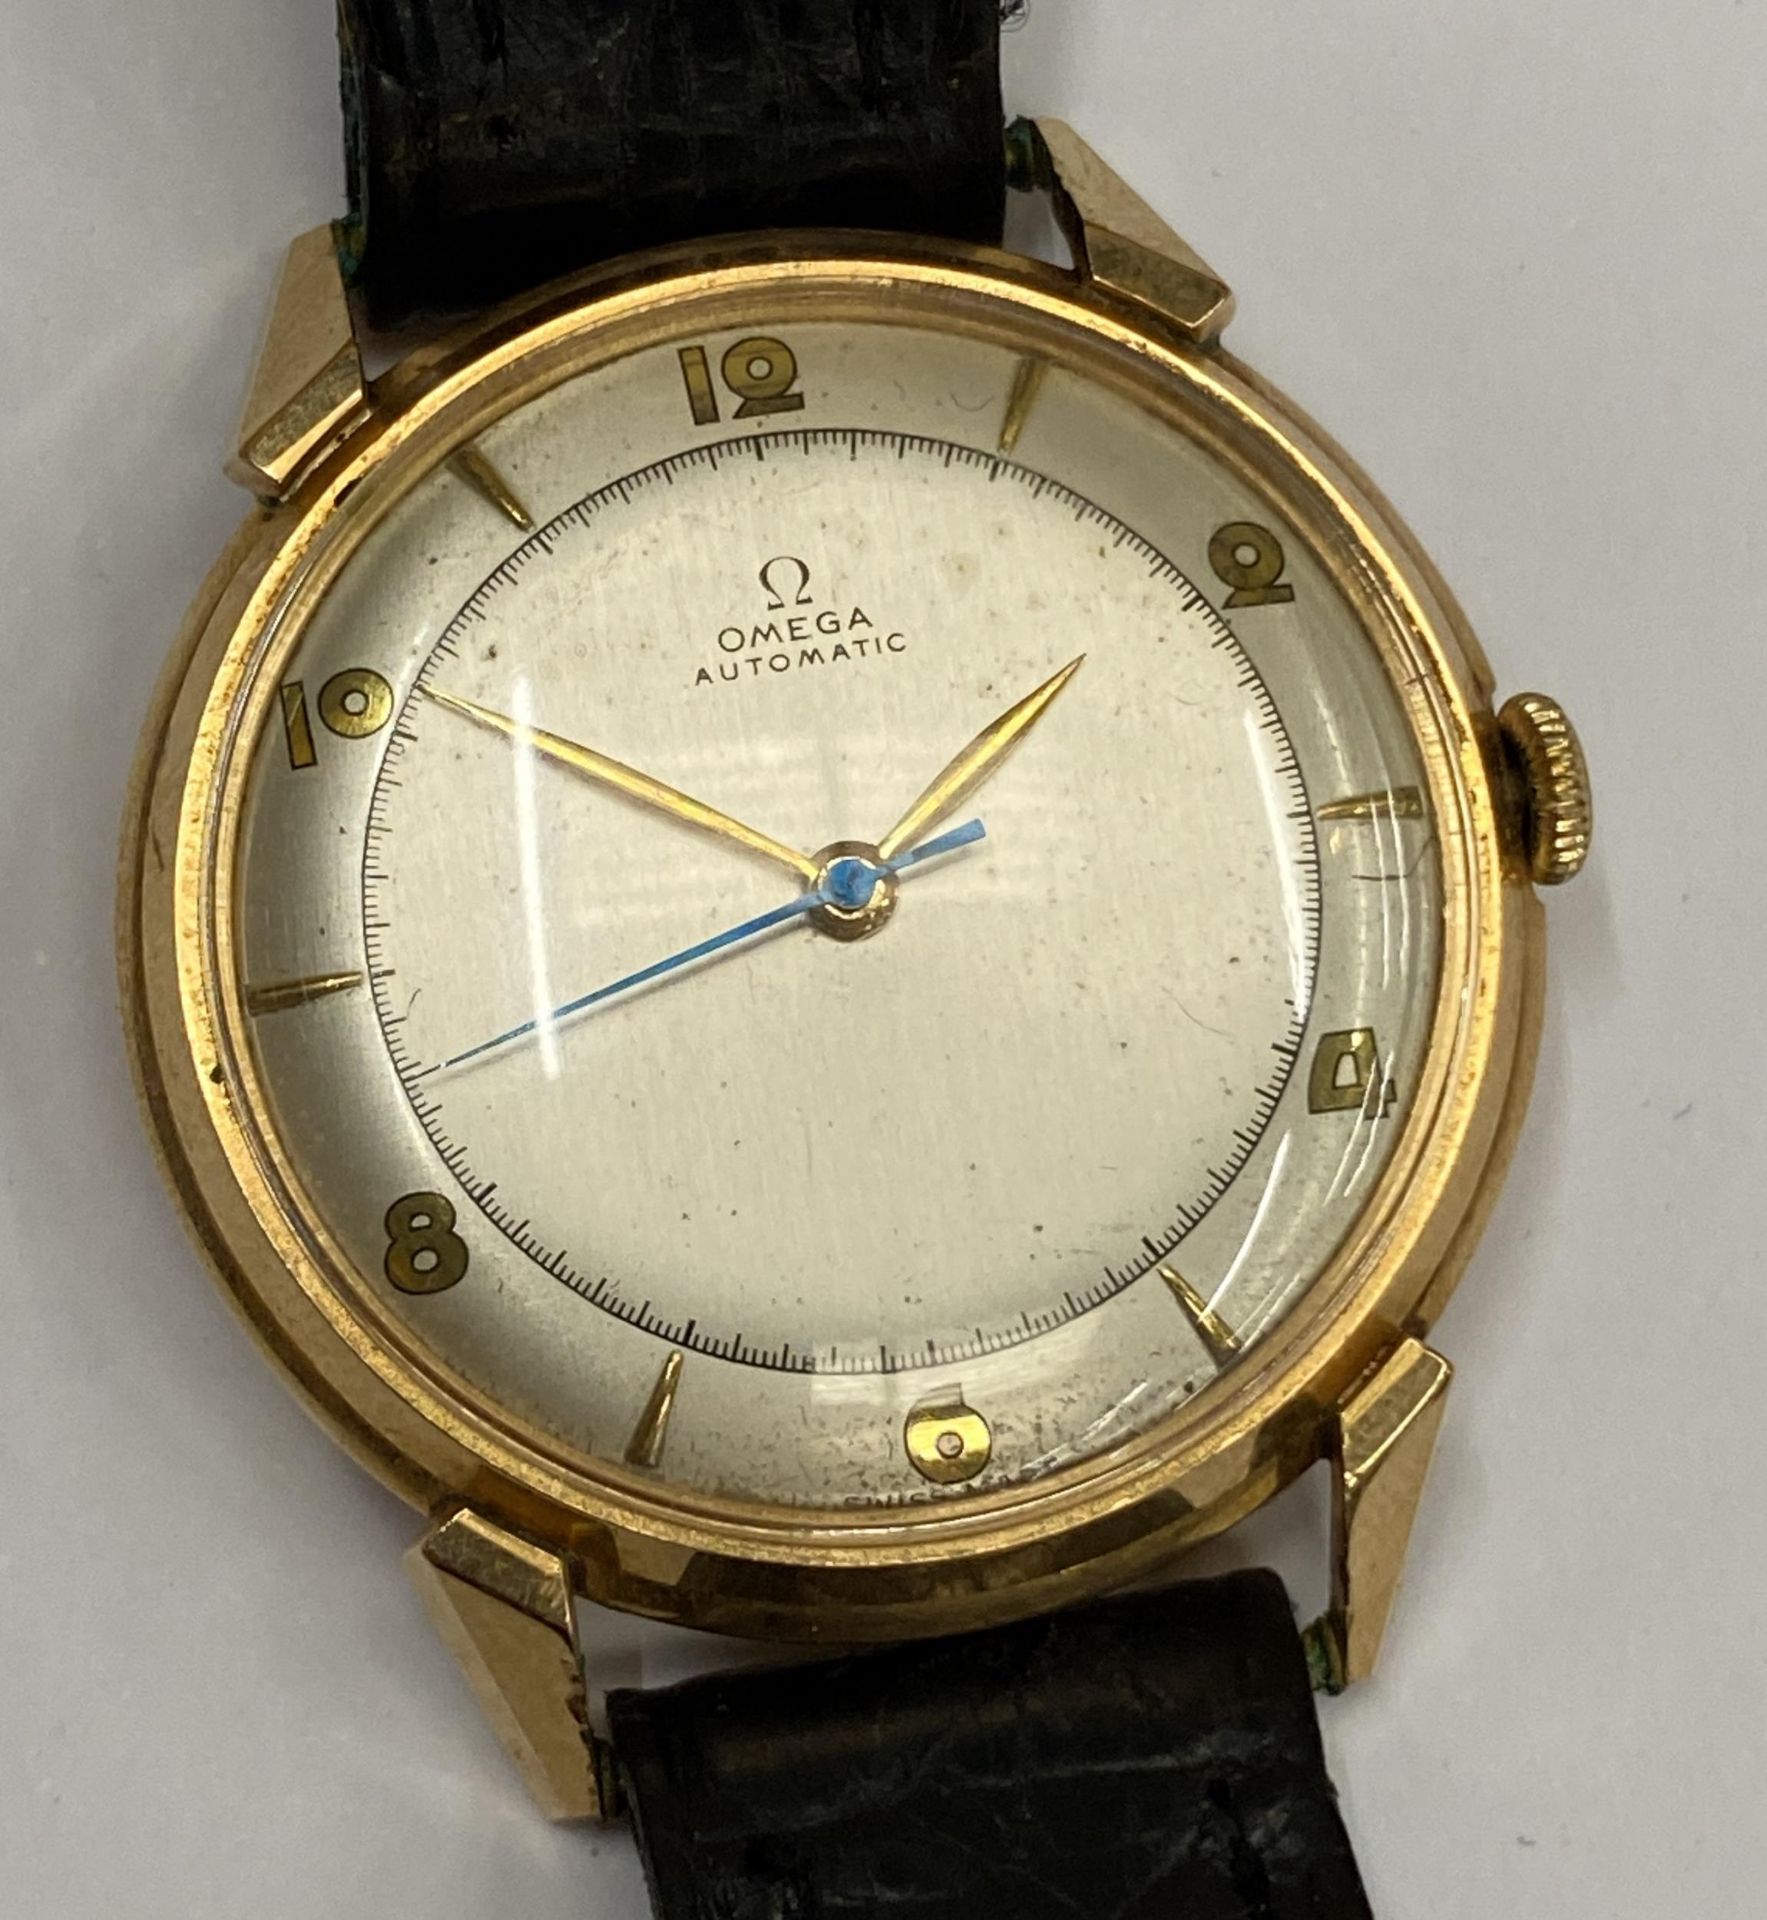 A 1940'S OMEGA BUMPER AUTOMATIC WATCH, YELLOW METAL UNMARKED CASE, WITH NON ORIGINAL BOX, WORKING AT